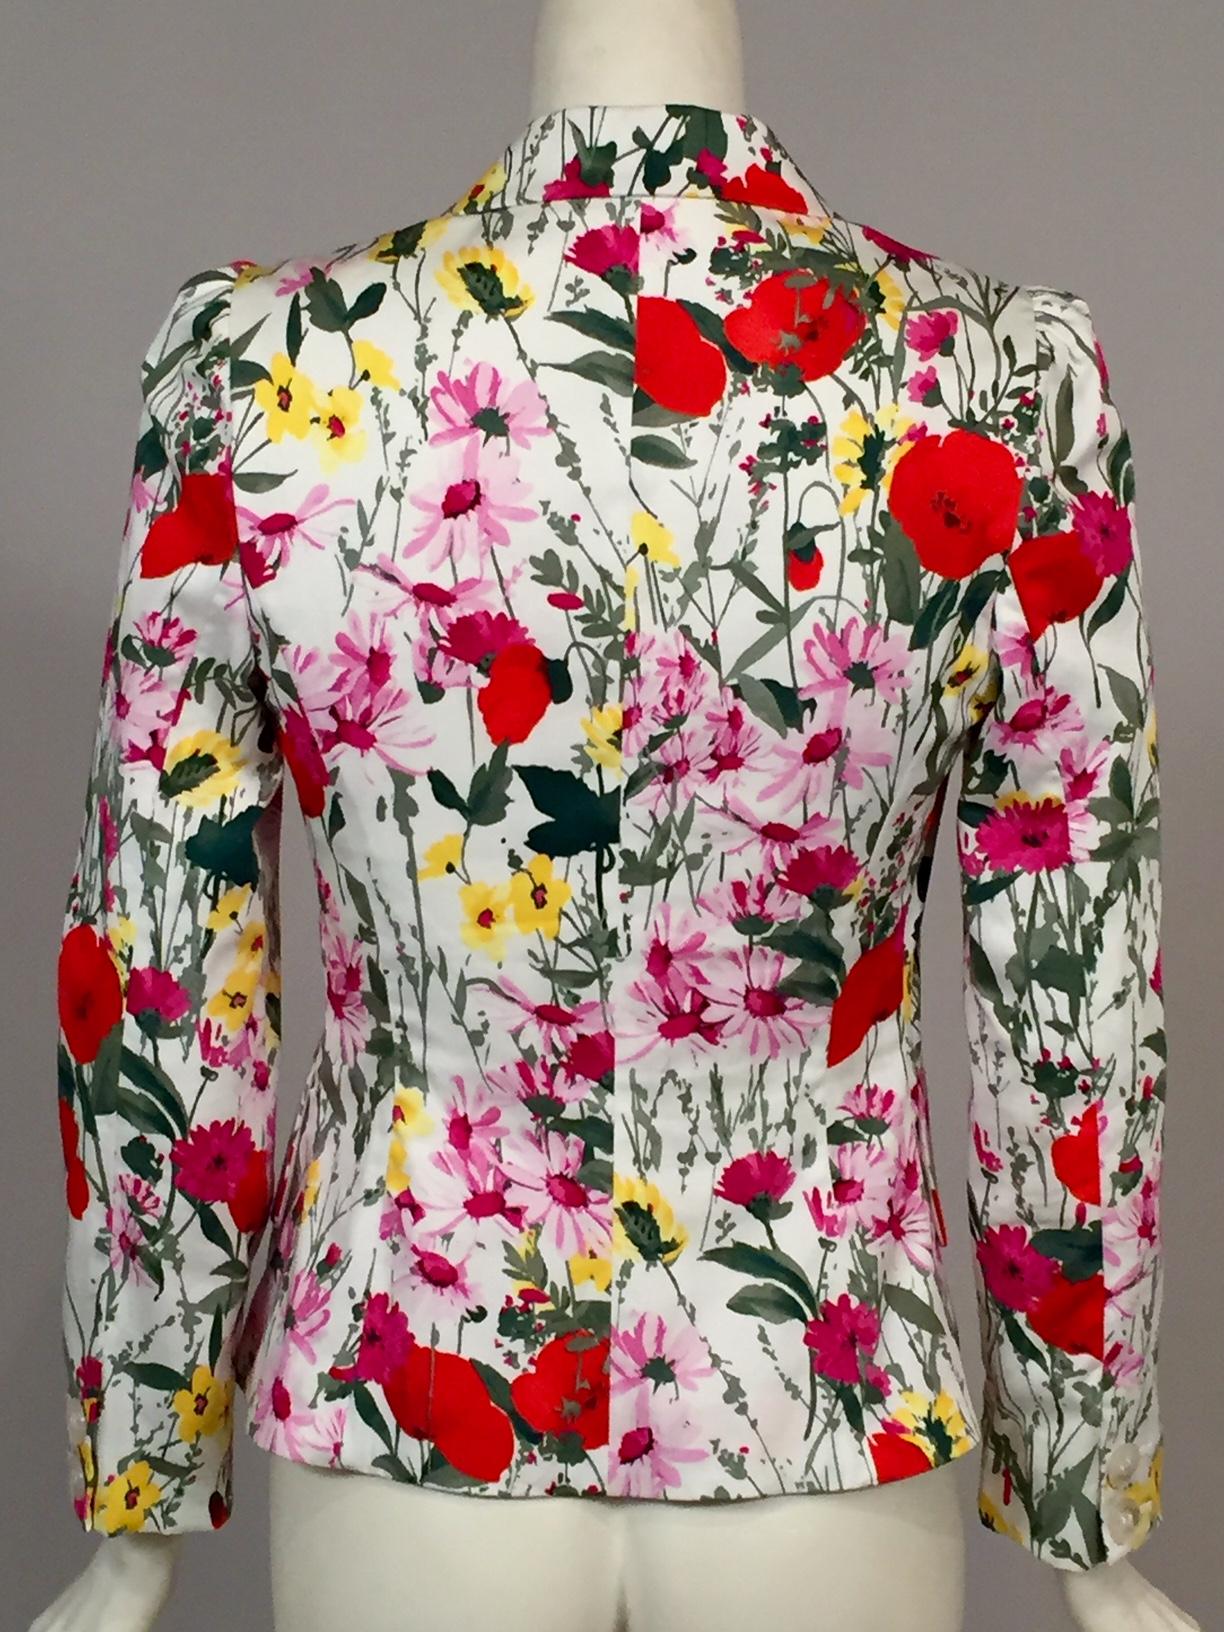 Women's Feraud White Cotton Jacket with Colorful Floral Print             